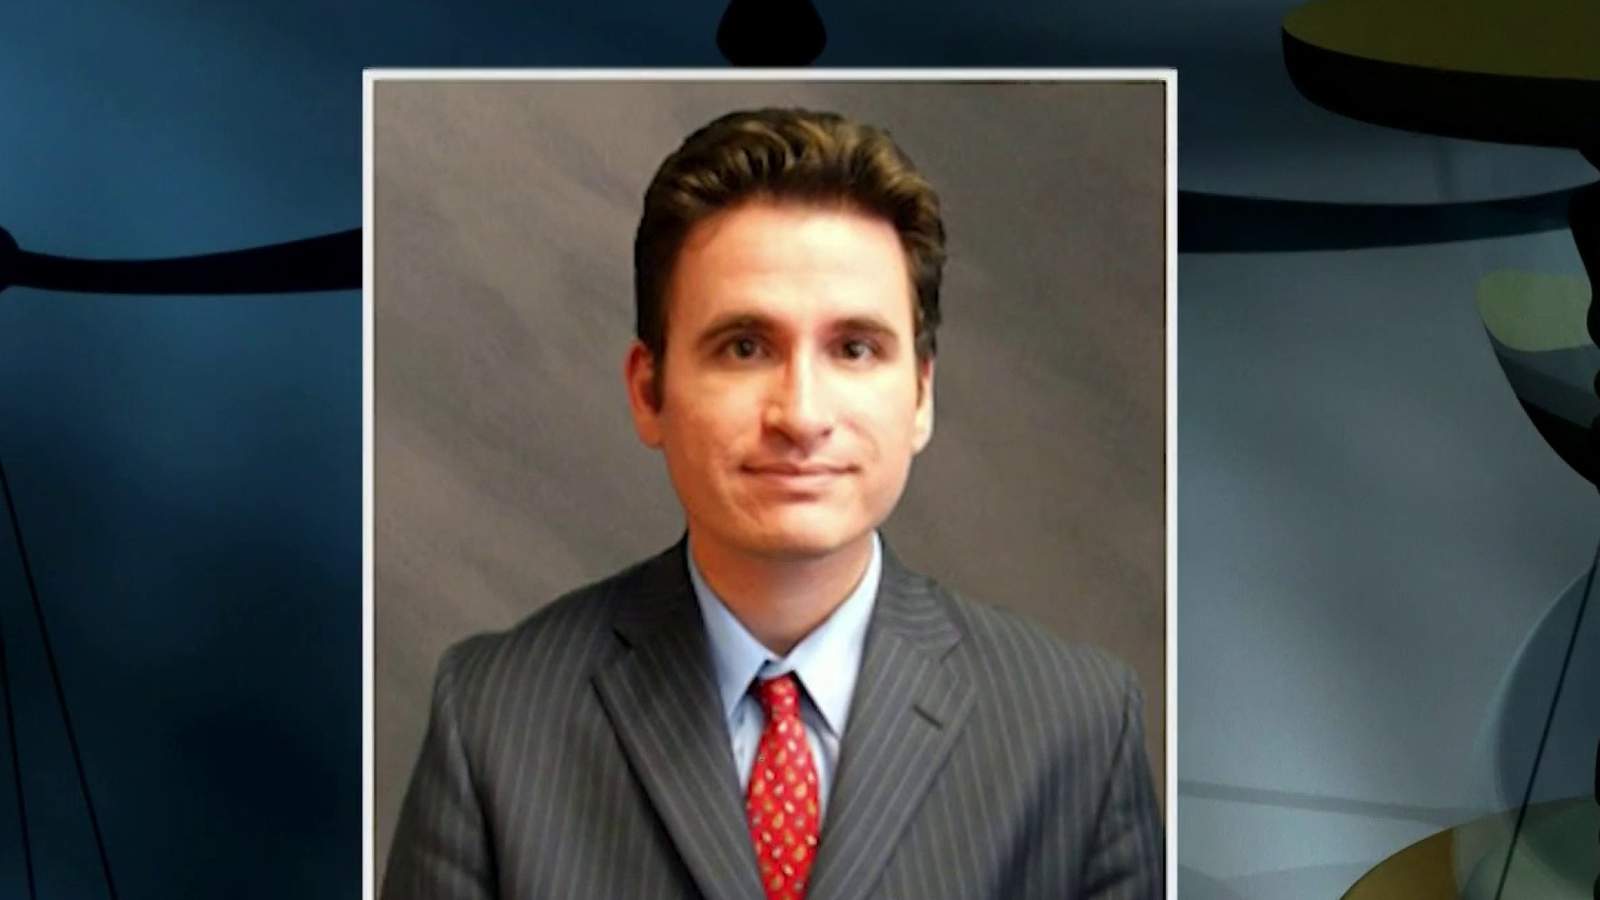 Orlando attorney accused of ghosting clients faces possible disbarment